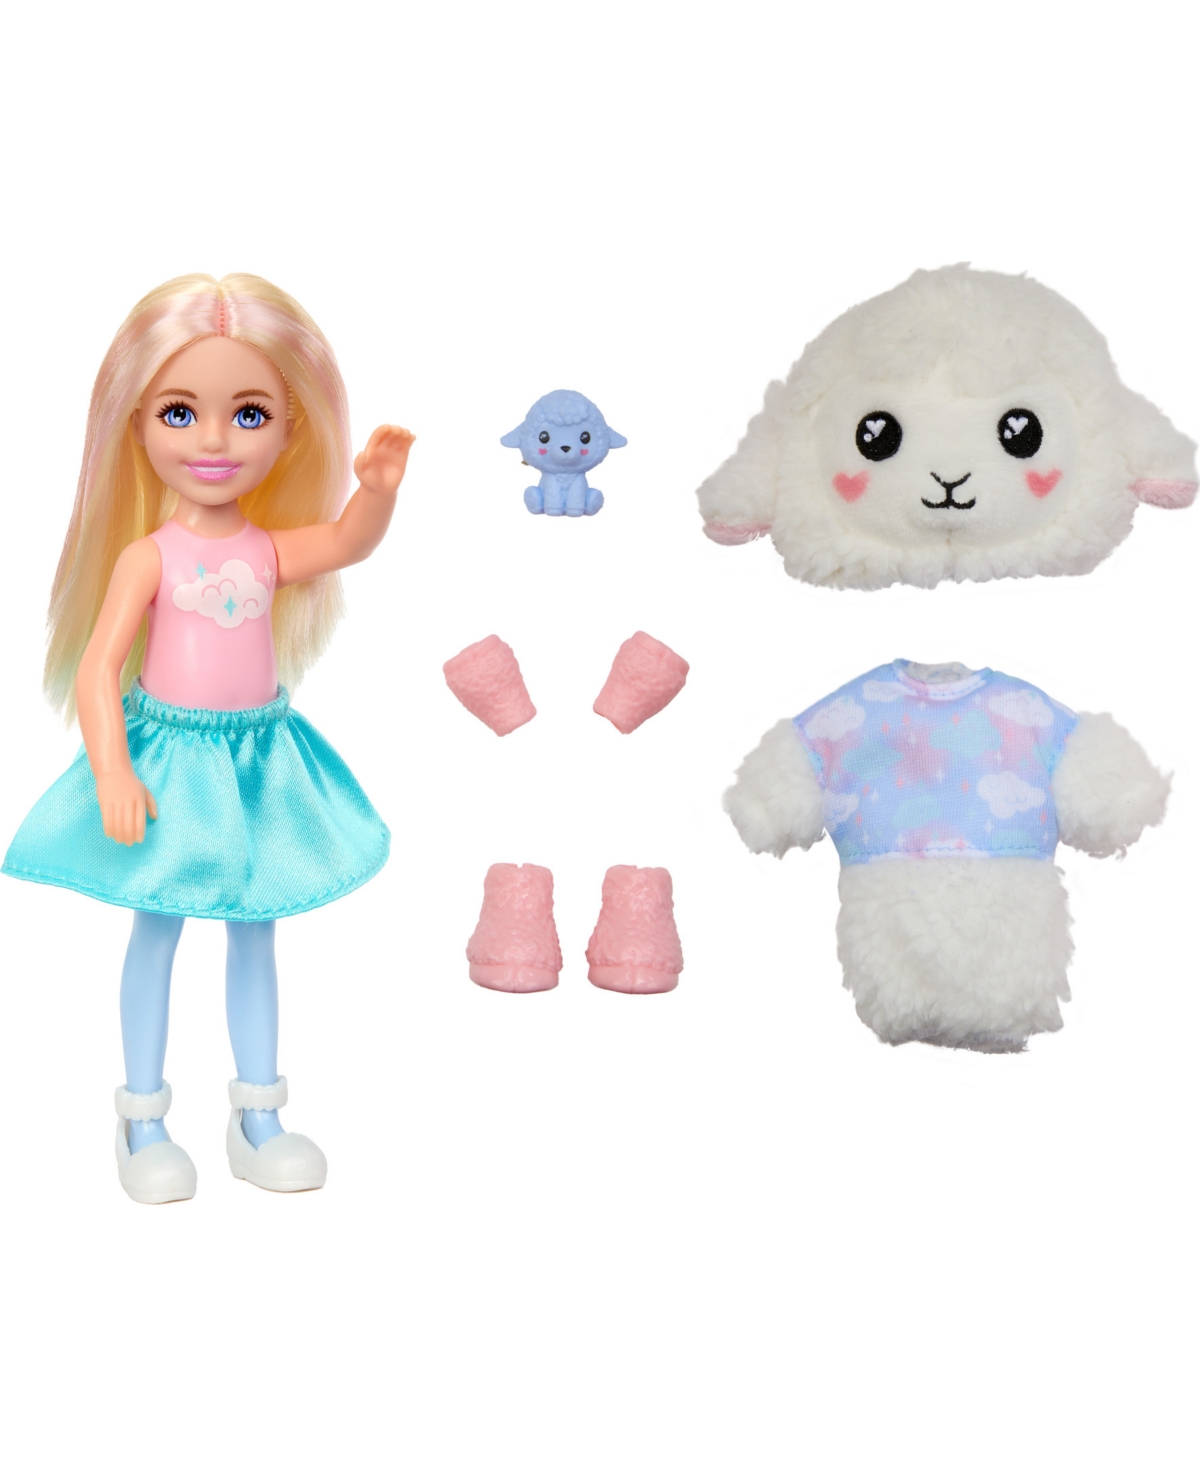 Shop Barbie Cutie Reveal Doll And Accessories, Cozy Cute T-shirts Lion, "hope" T-shirt, Purple-streaked Blonde H In Multi-color